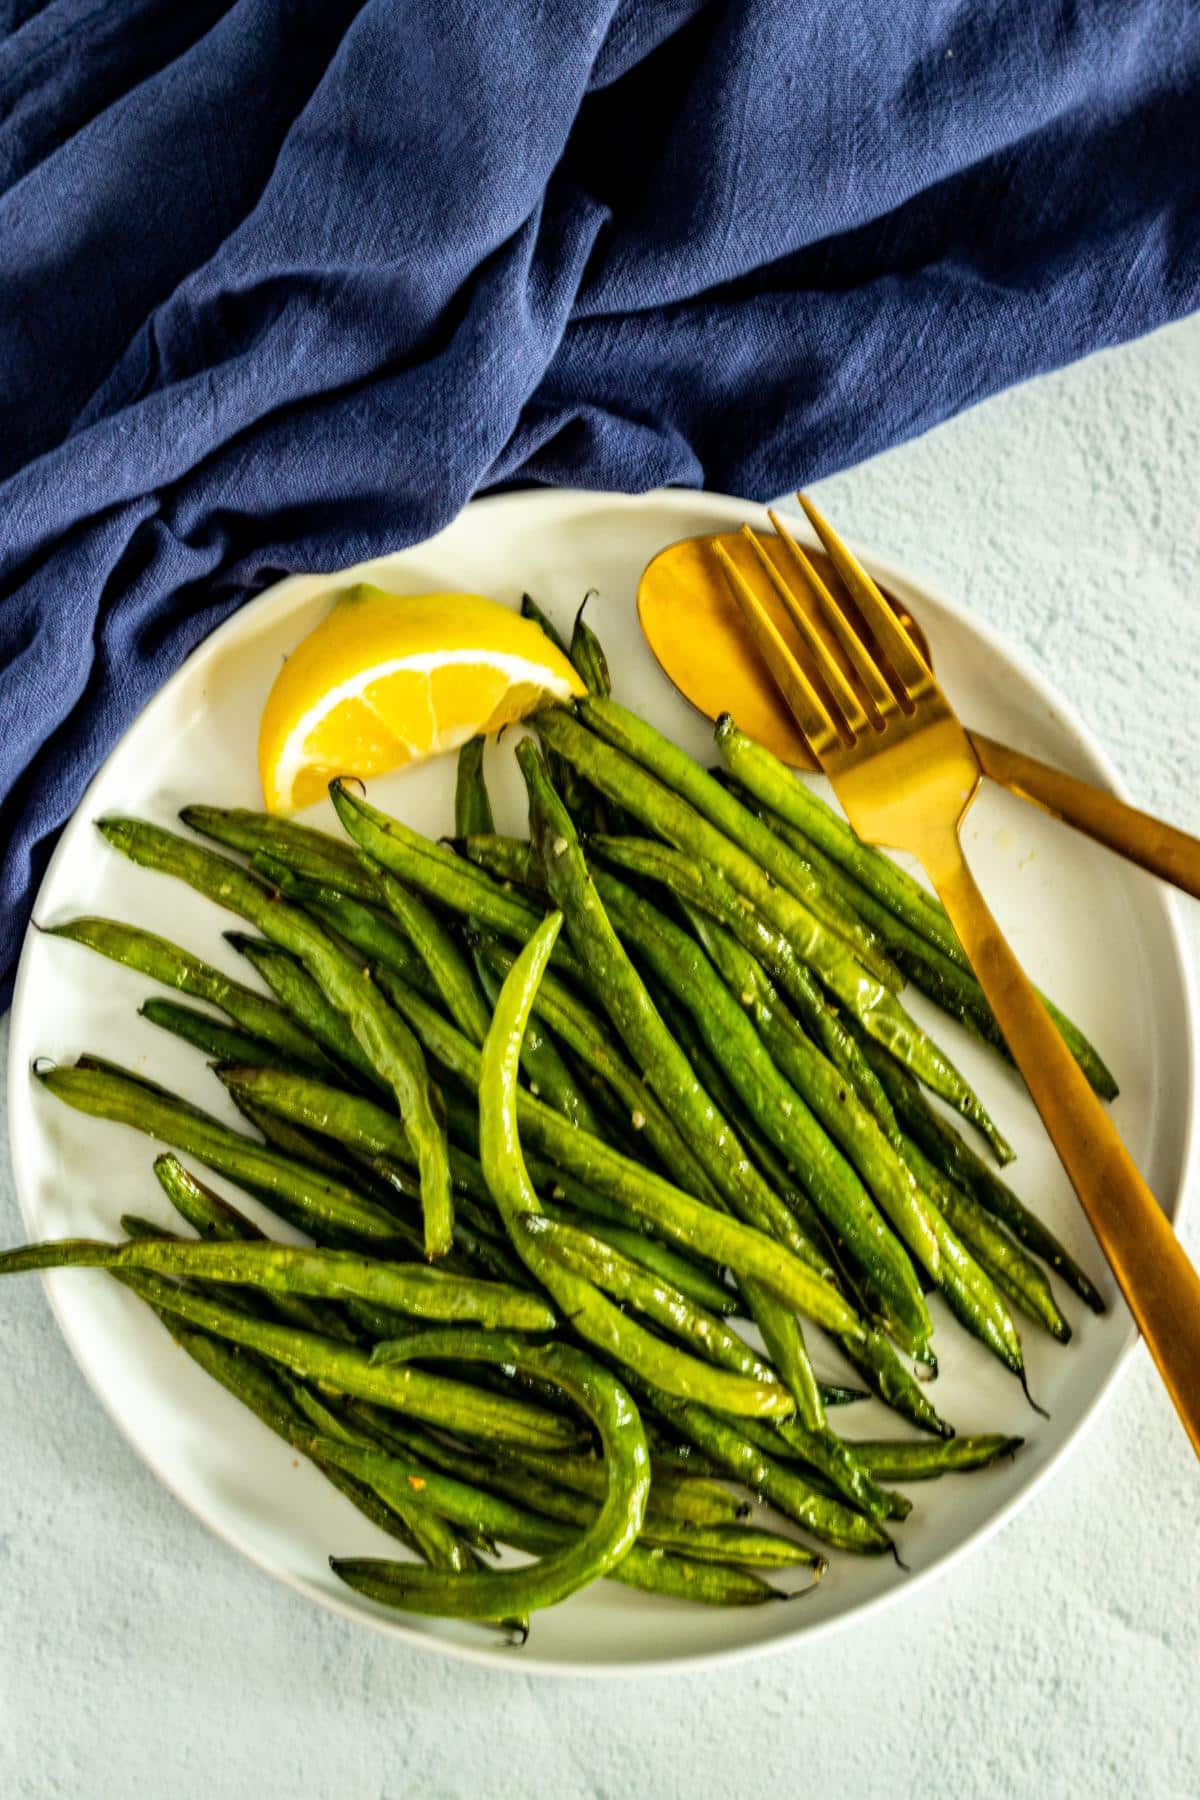 Plate of green beans with serving utensils and lemon wedge.